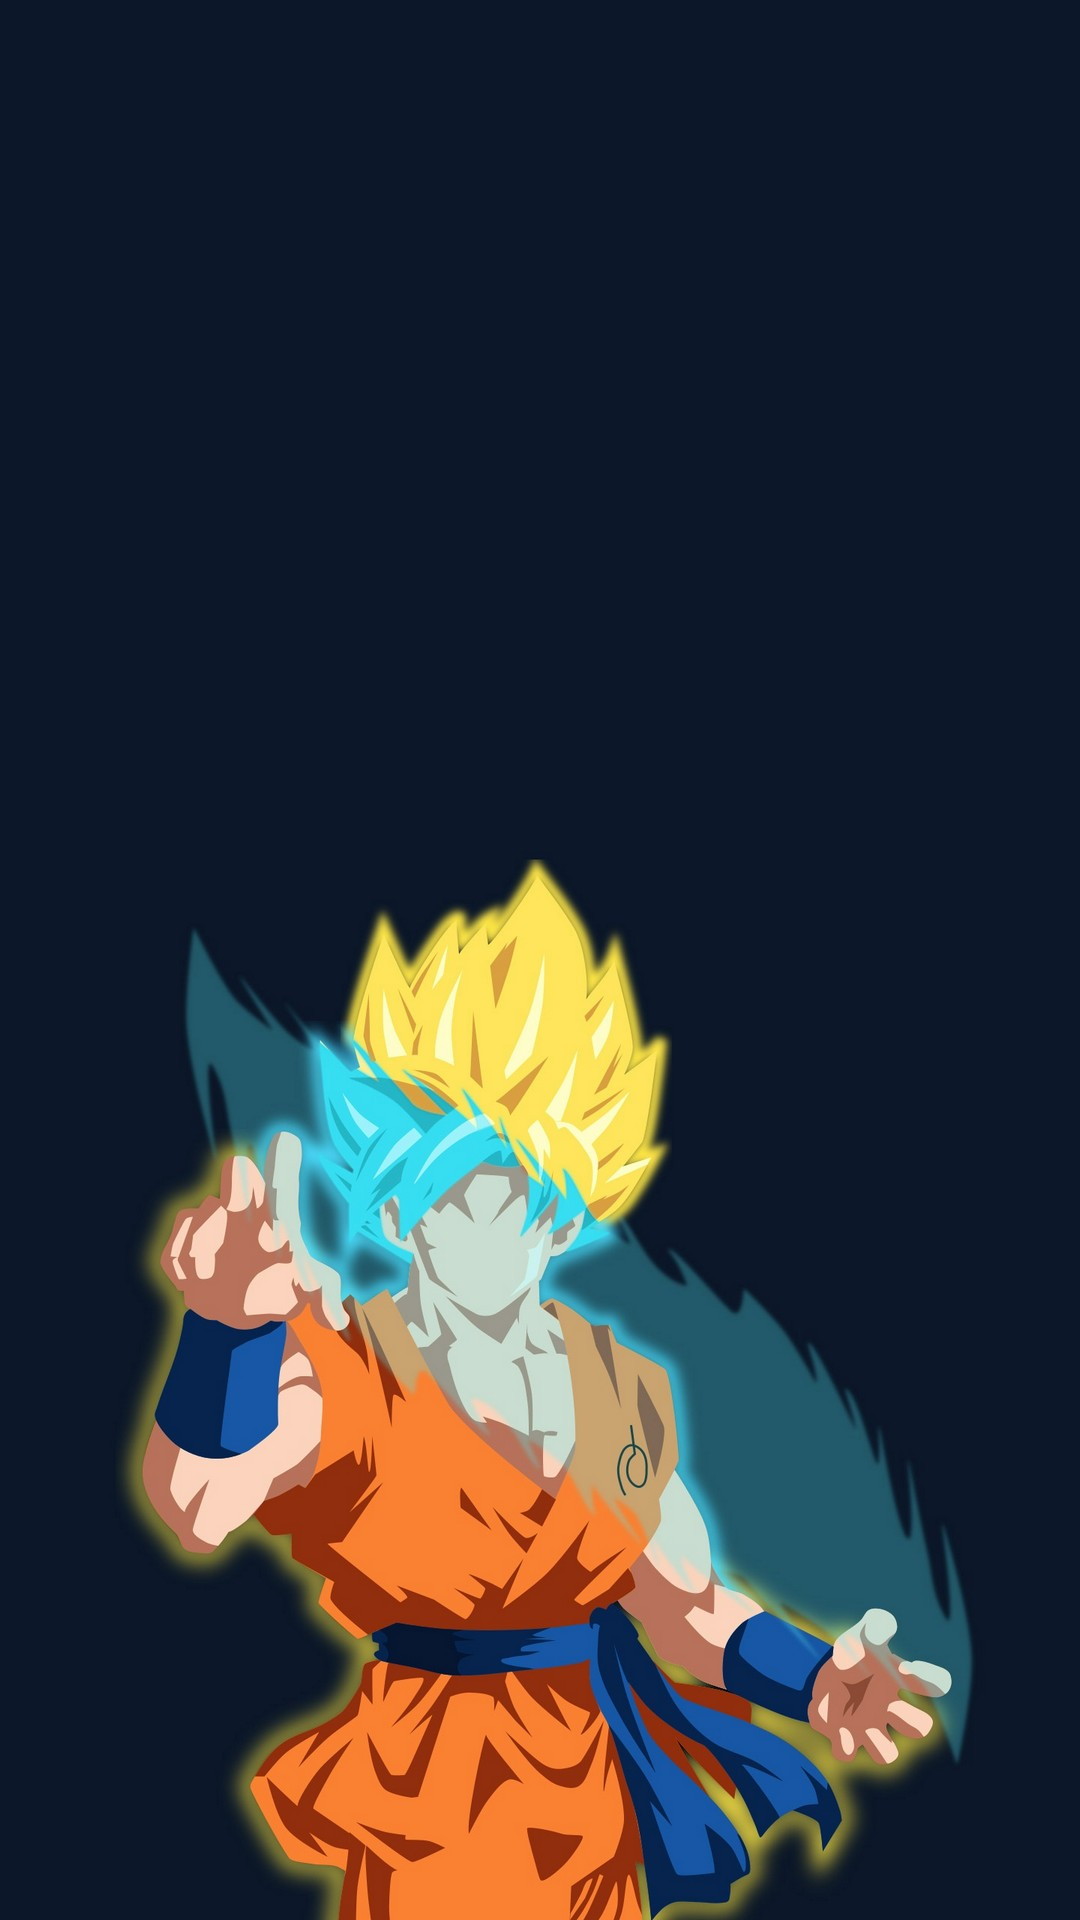 Goku Super Saiyan Mobile Wallpaper with high-resolution 1080x1920 pixel. You can use and set as wallpaper for Notebook Screensavers, Mac Wallpapers, Mobile Home Screen, iPhone or Android Phones Lock Screen